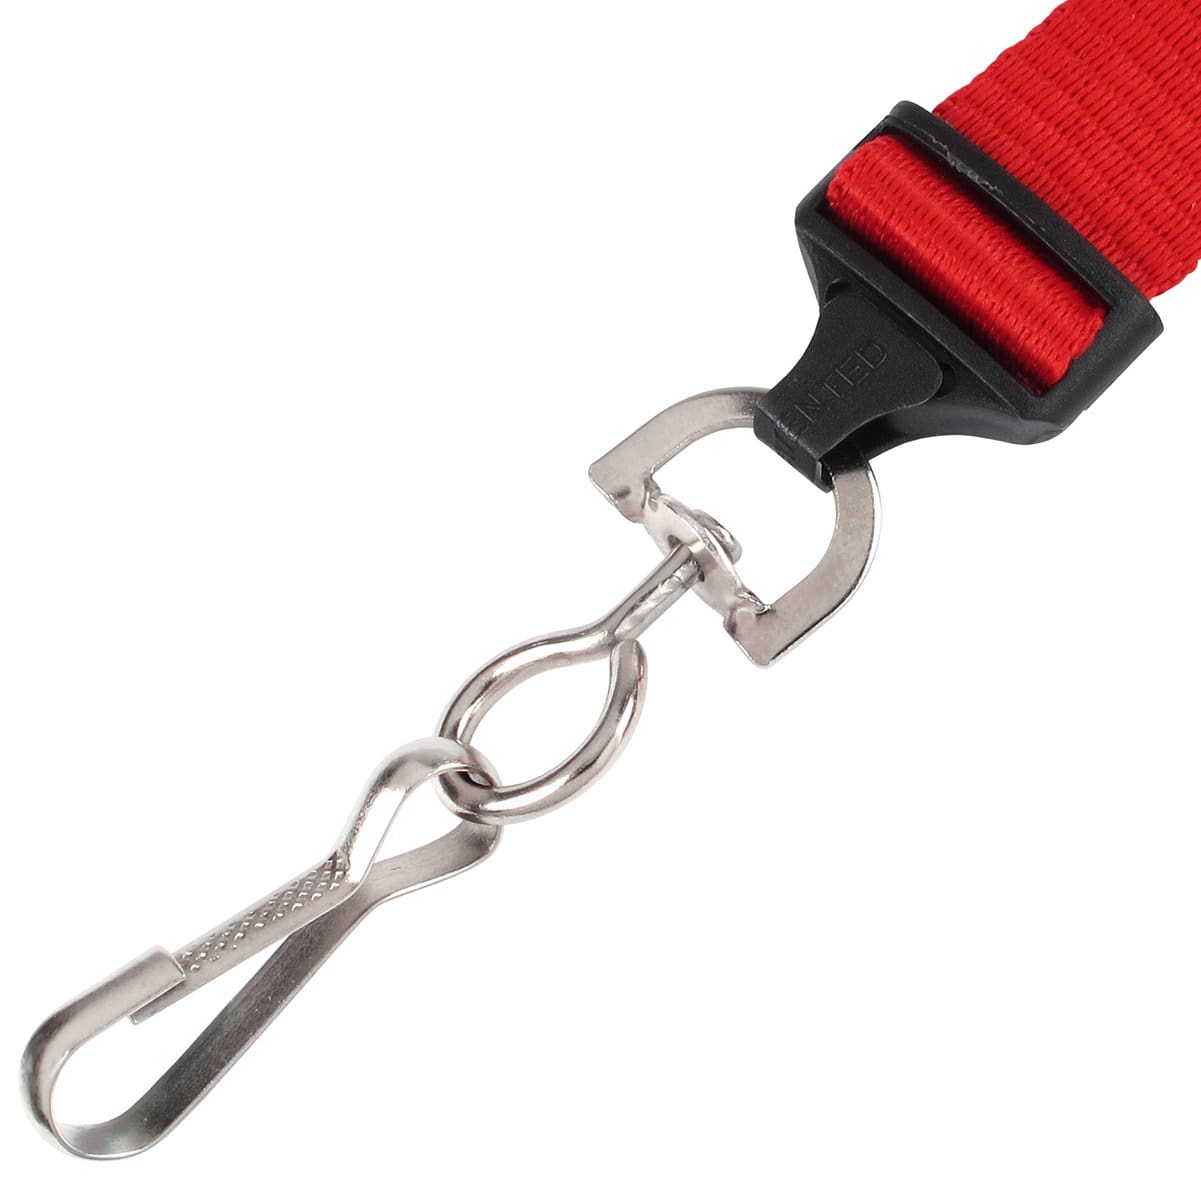 Premium Metal Swivel J Hook Clips with 1/2 inch D Ring - Great for DIY Lanyards & Crafts (6920-2300)